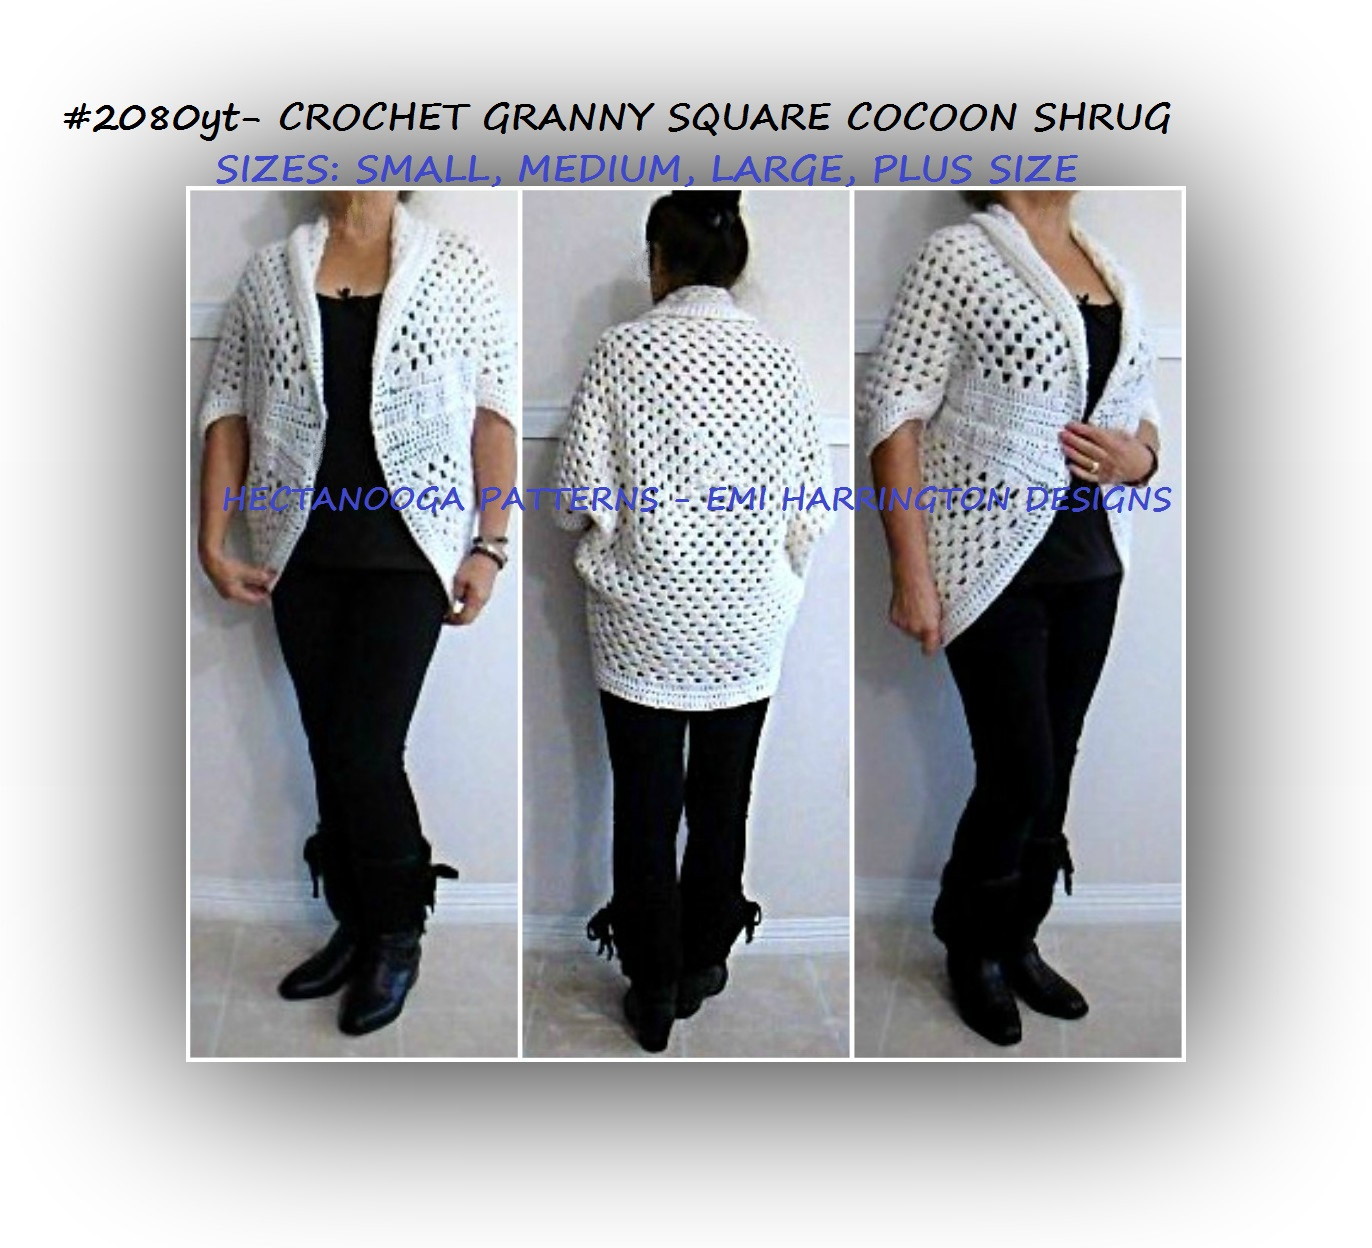 Crochet Shrug Plus Size Pattern Hectanooga Patterns Free Crochet Pattern Granny Square Outdoor